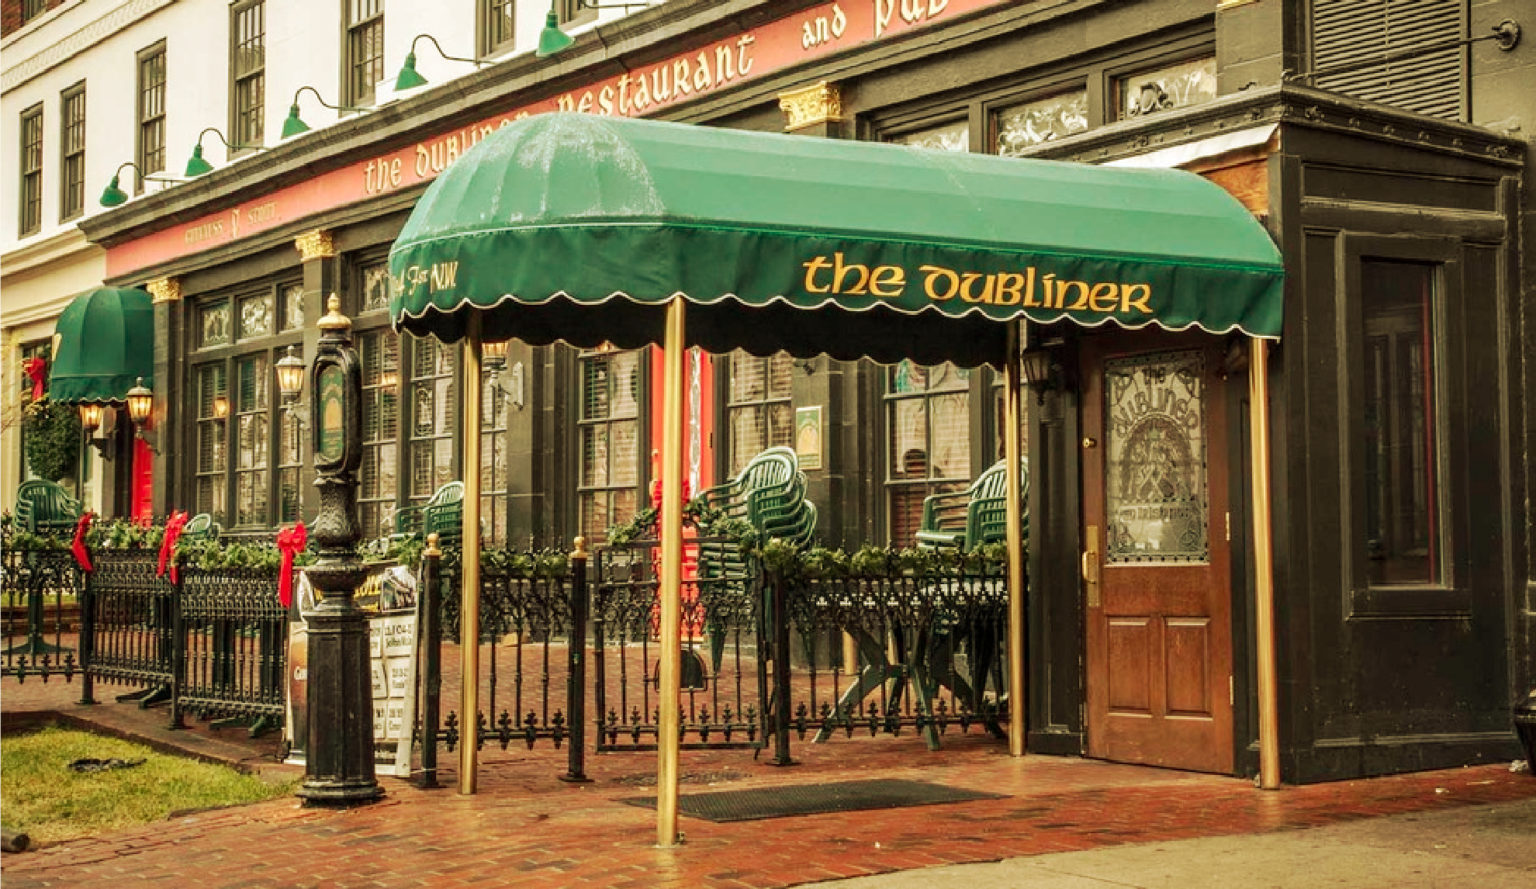 5 Historic Bars in DC You Don't Want To Miss! Drink In The History of DC...